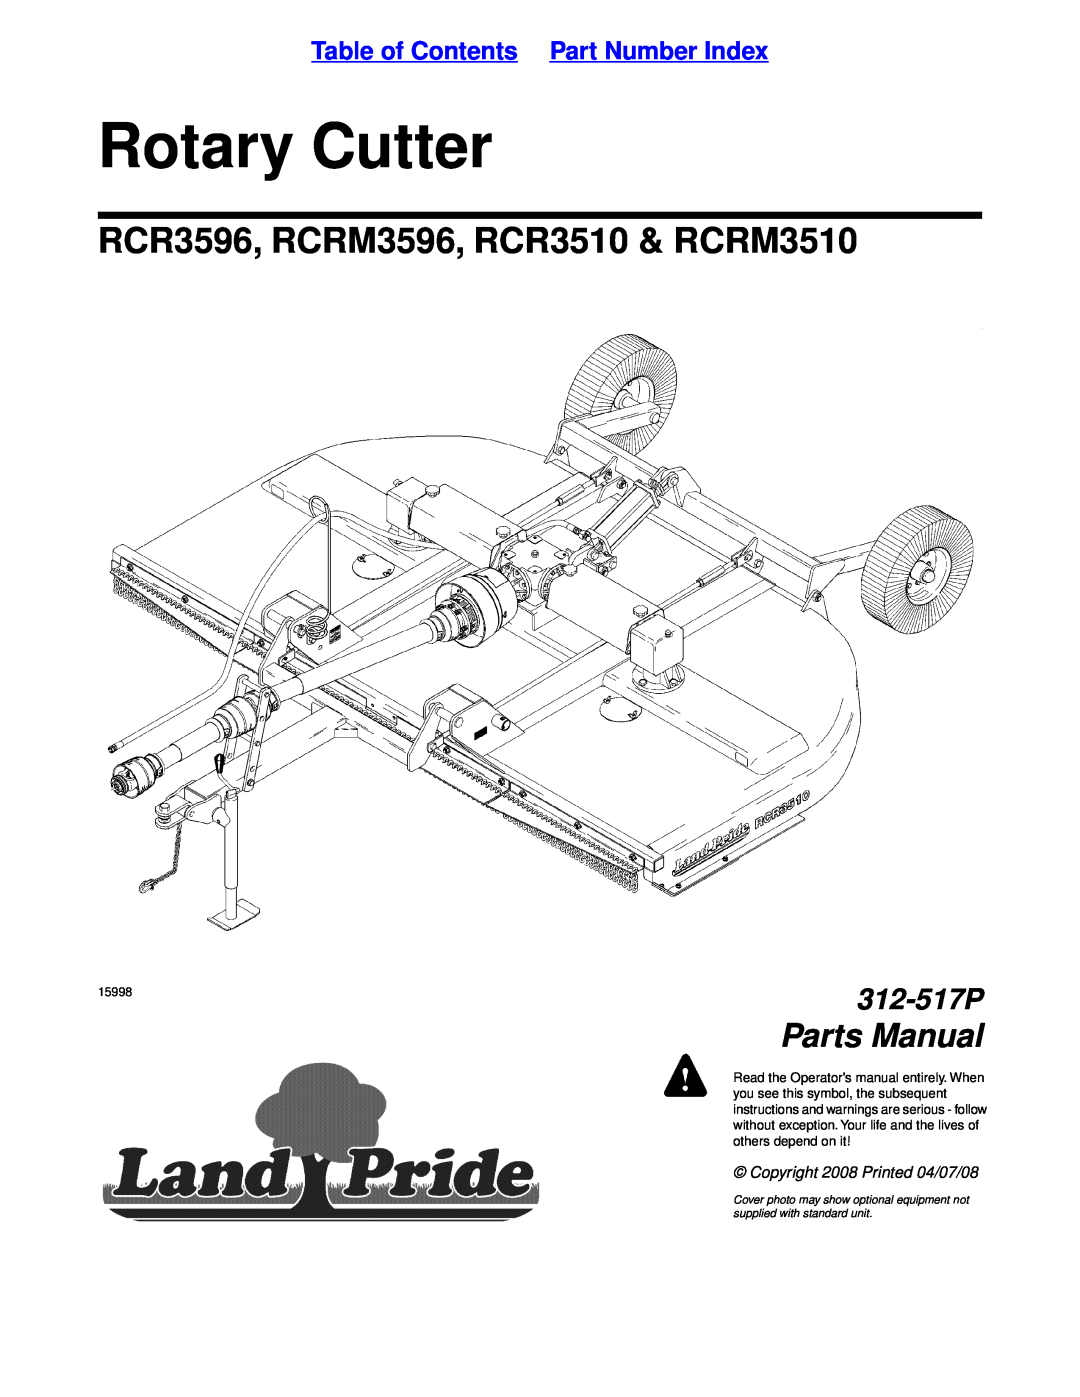 Land Pride manual Table of Contents Part Number Index, Rotary Cutter, RCR3596, RCRM3596, RCR3510 & RCRM3510, 312-517P 